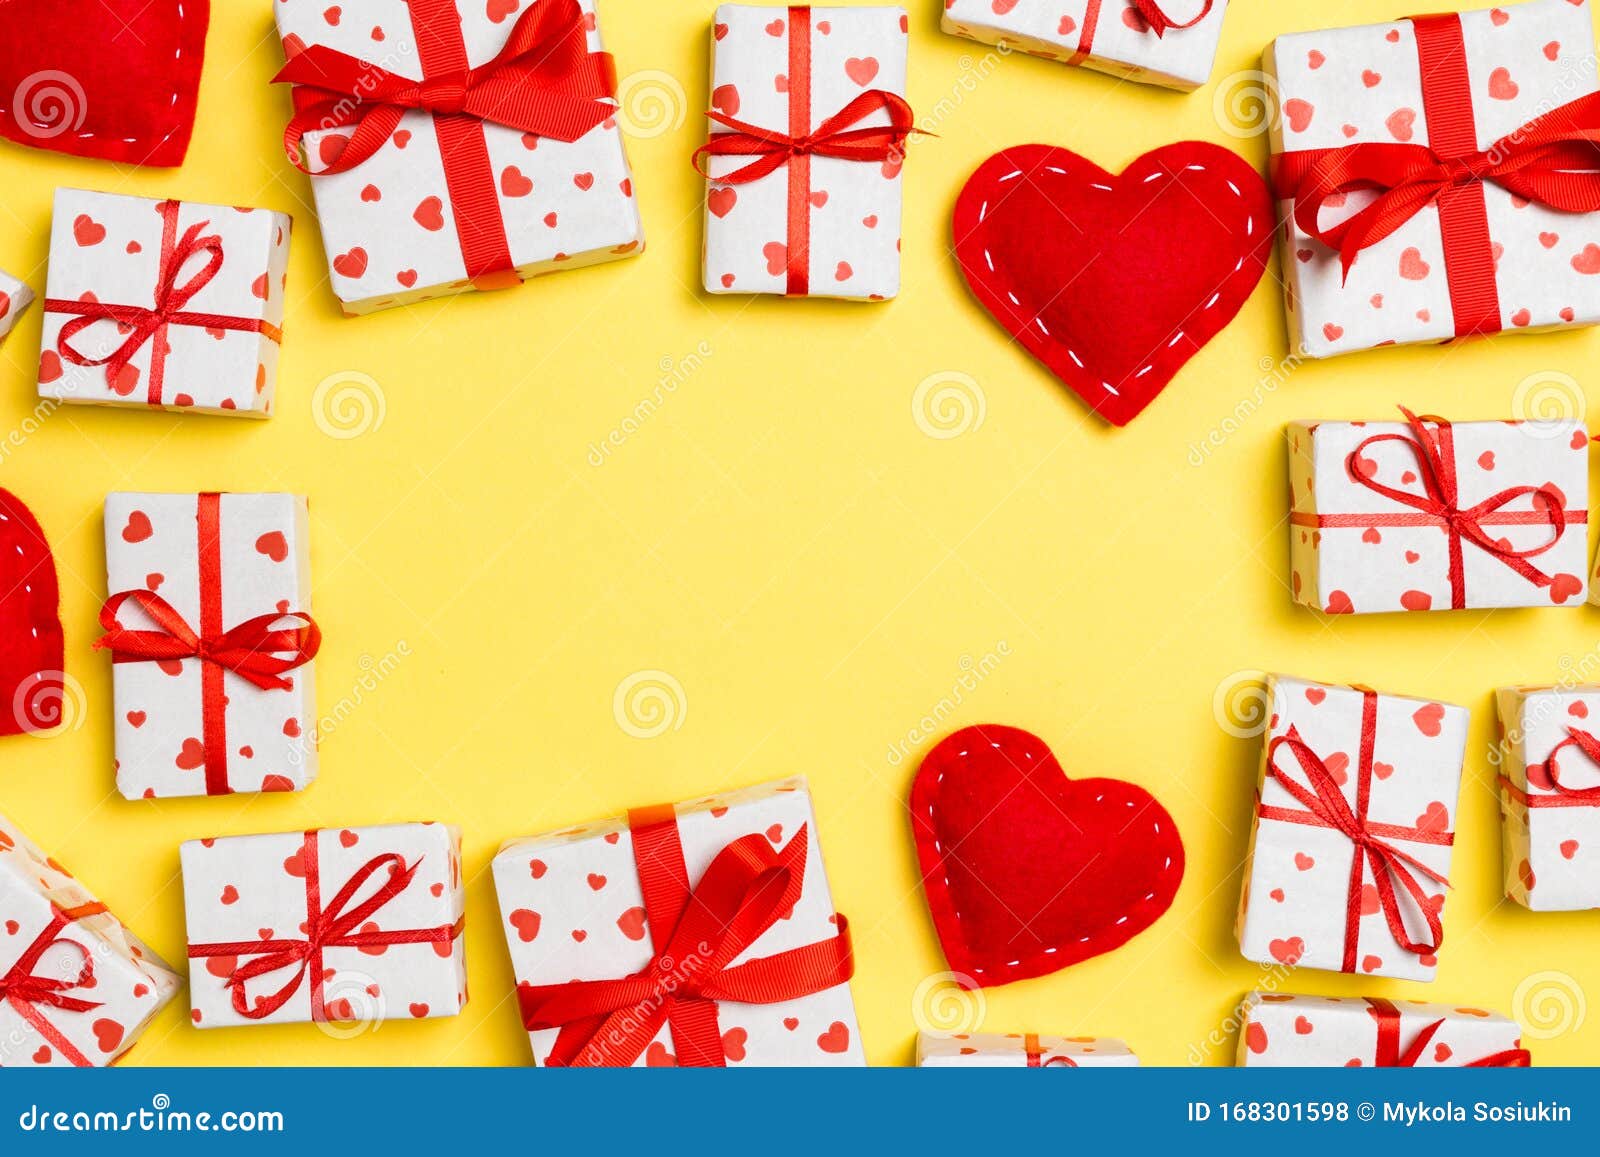 Top View of Festive Gift Boxes and Red Textile Hearts on Colorful ...